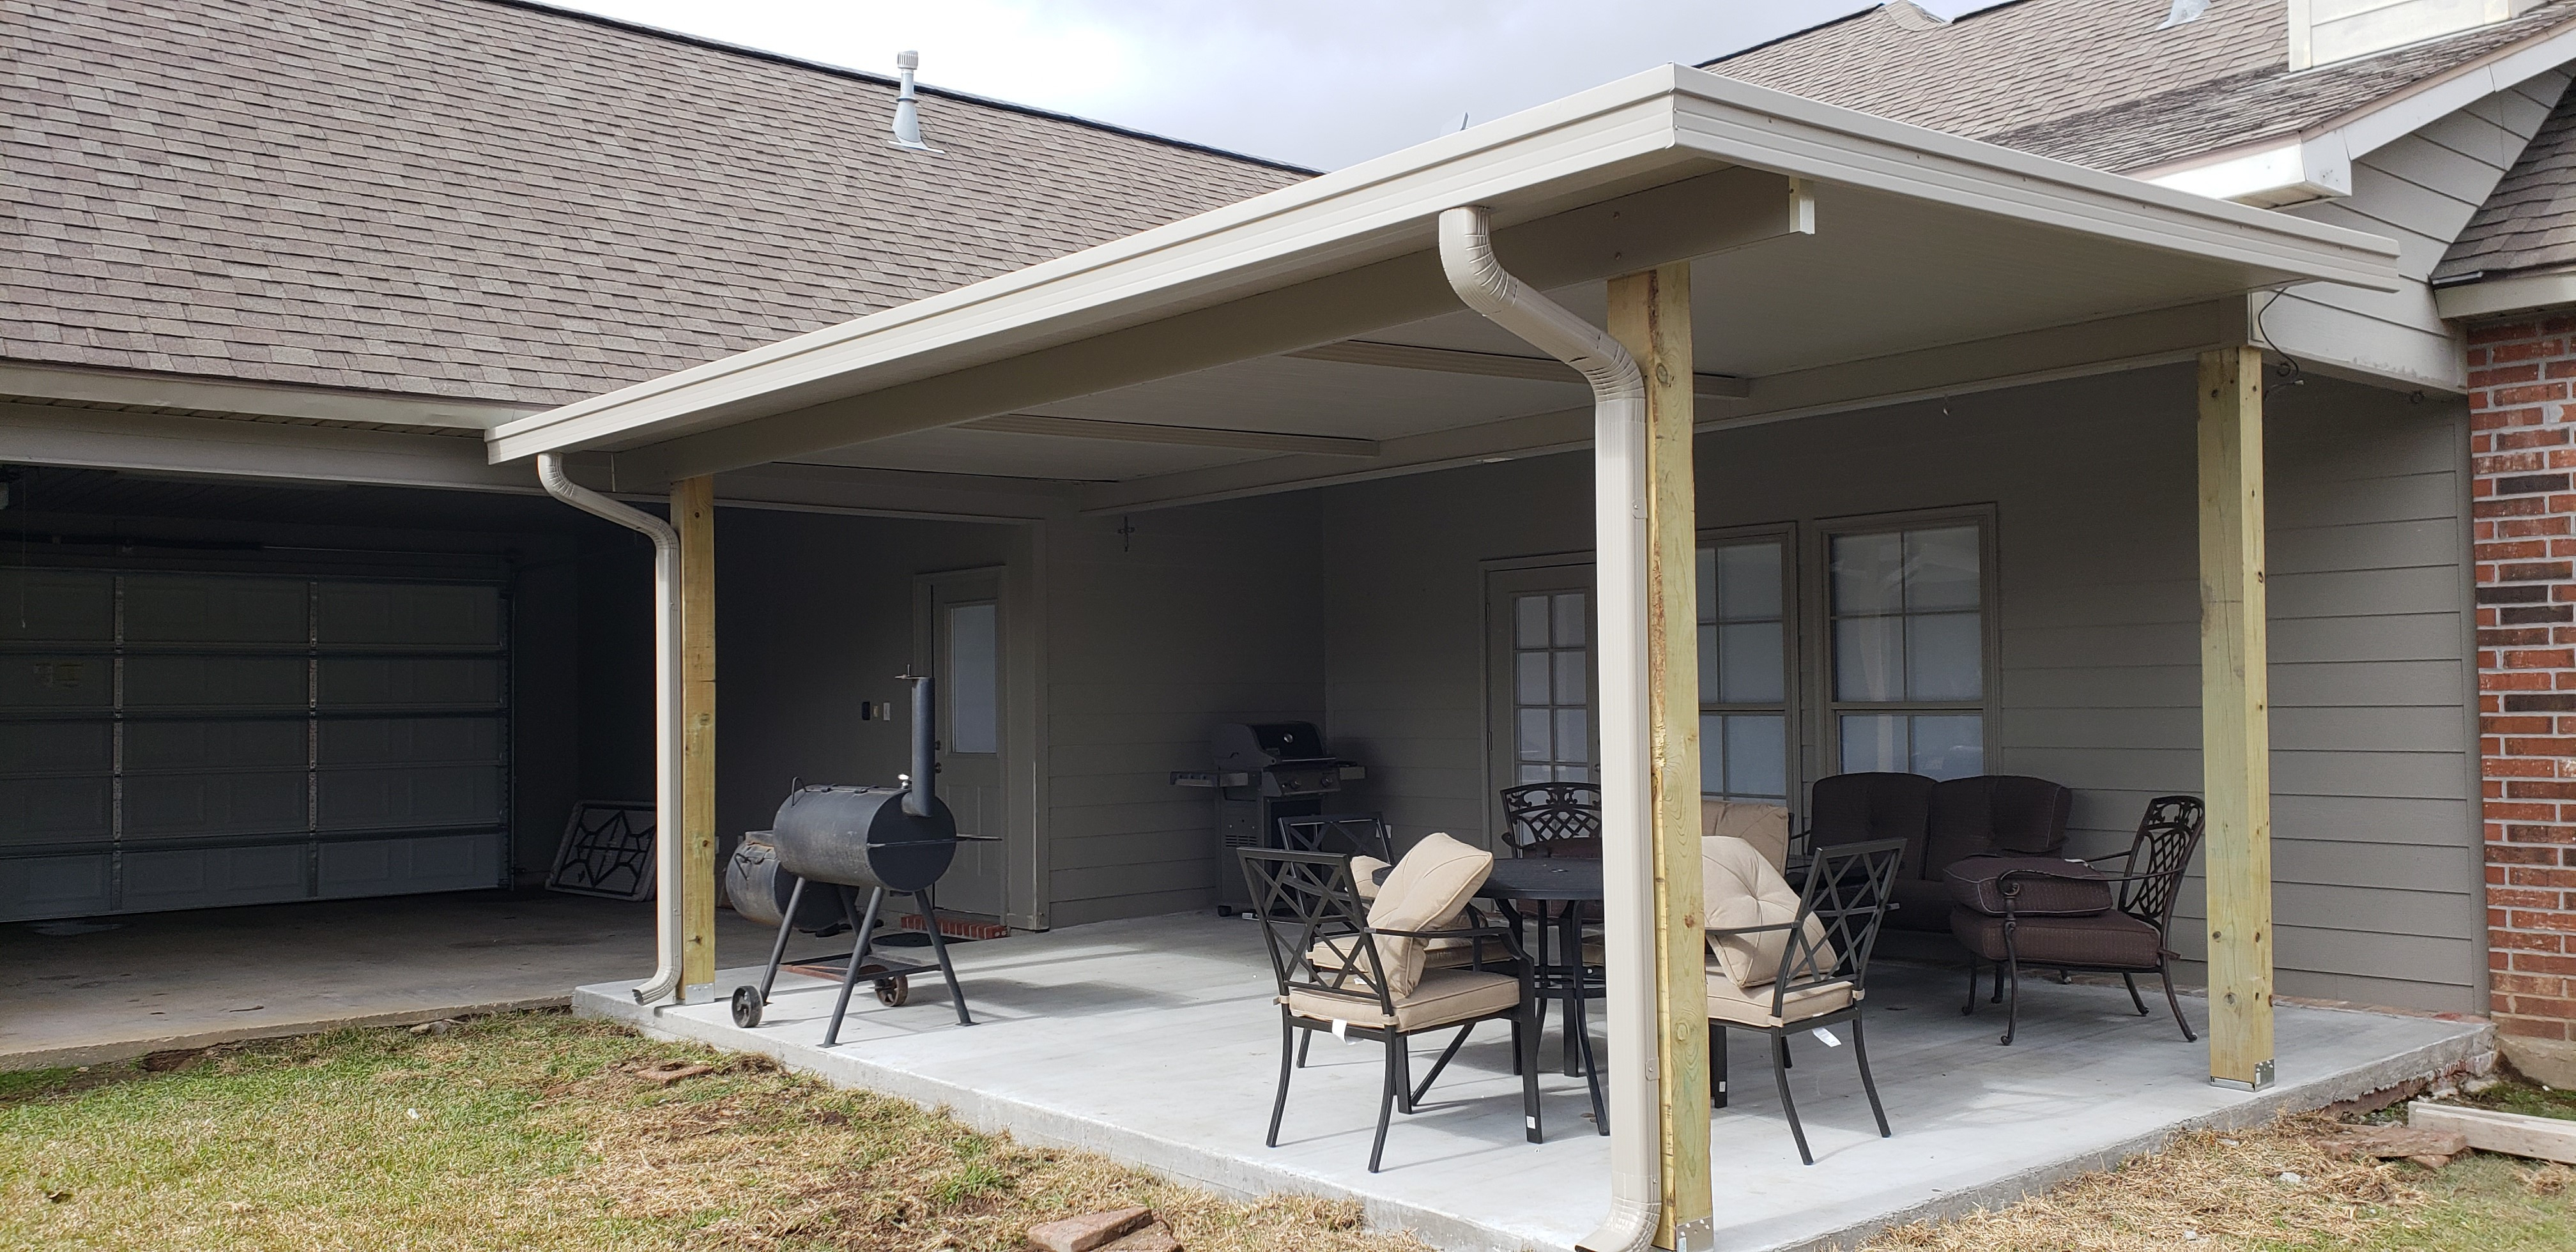 Patio Cover Contractor Lafayette La Liberty Home with size 4032 X 1960